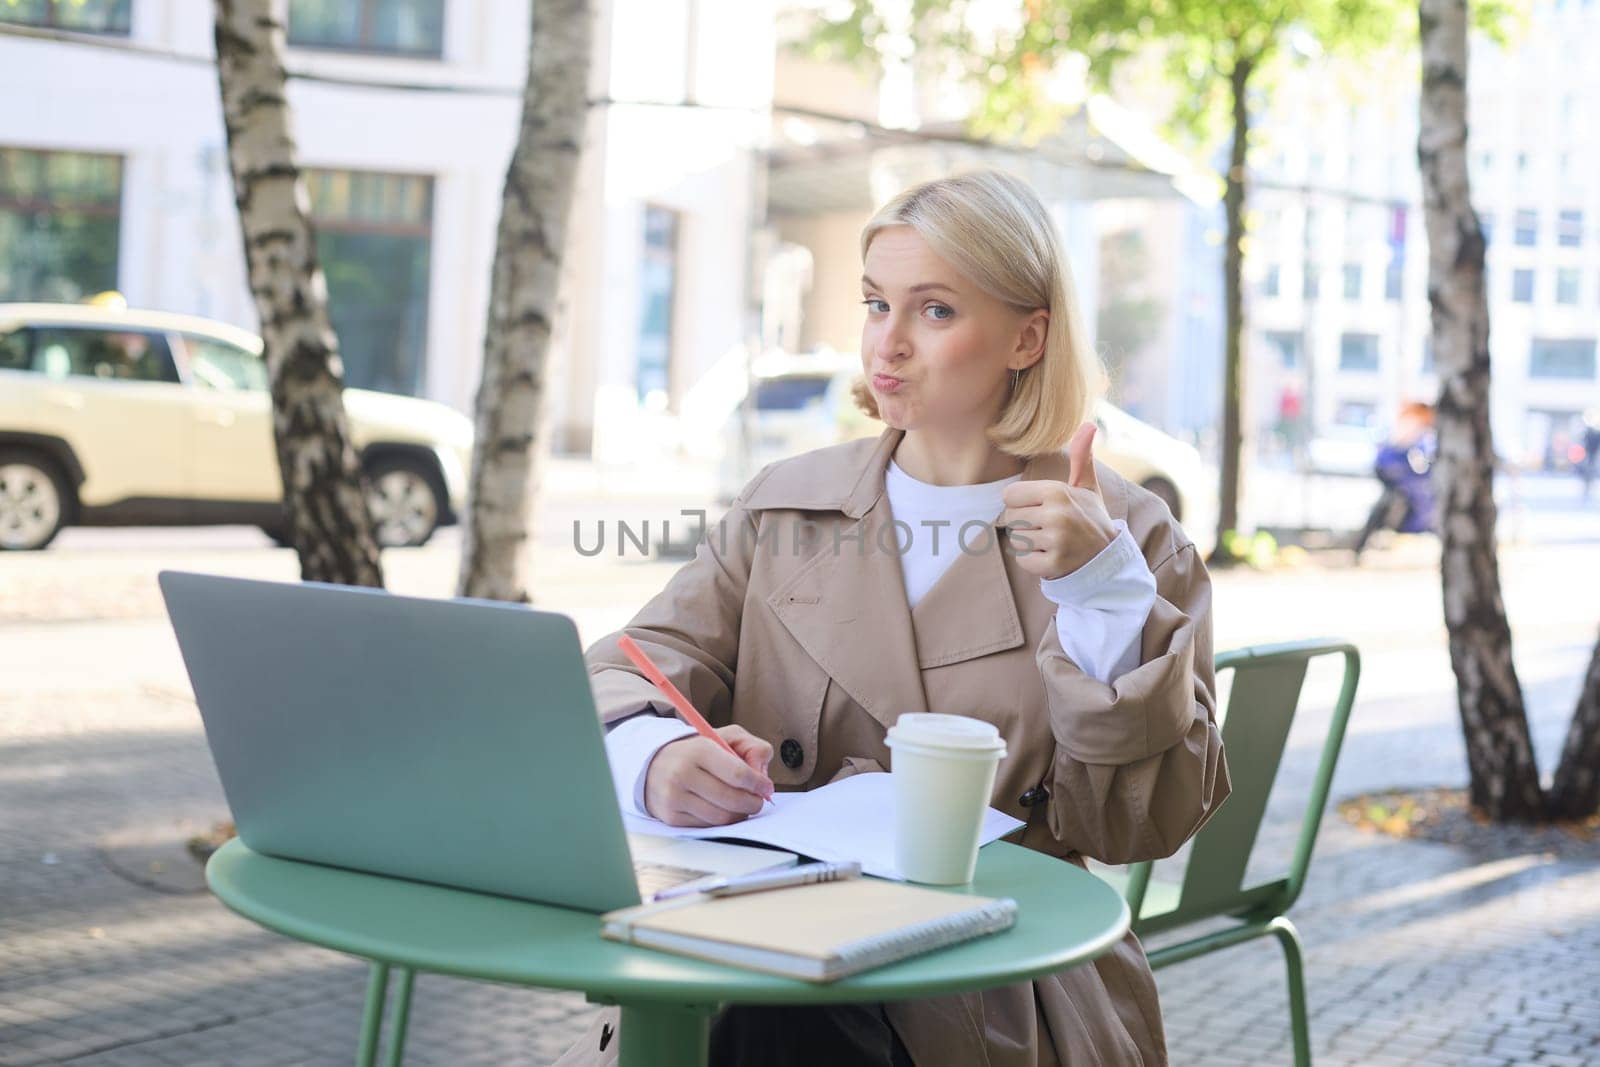 Image of impressed, satisfied young woman, sitting in outdoor cafe with laptop, showing thumbs up and nod in approval. Lifestyle concept